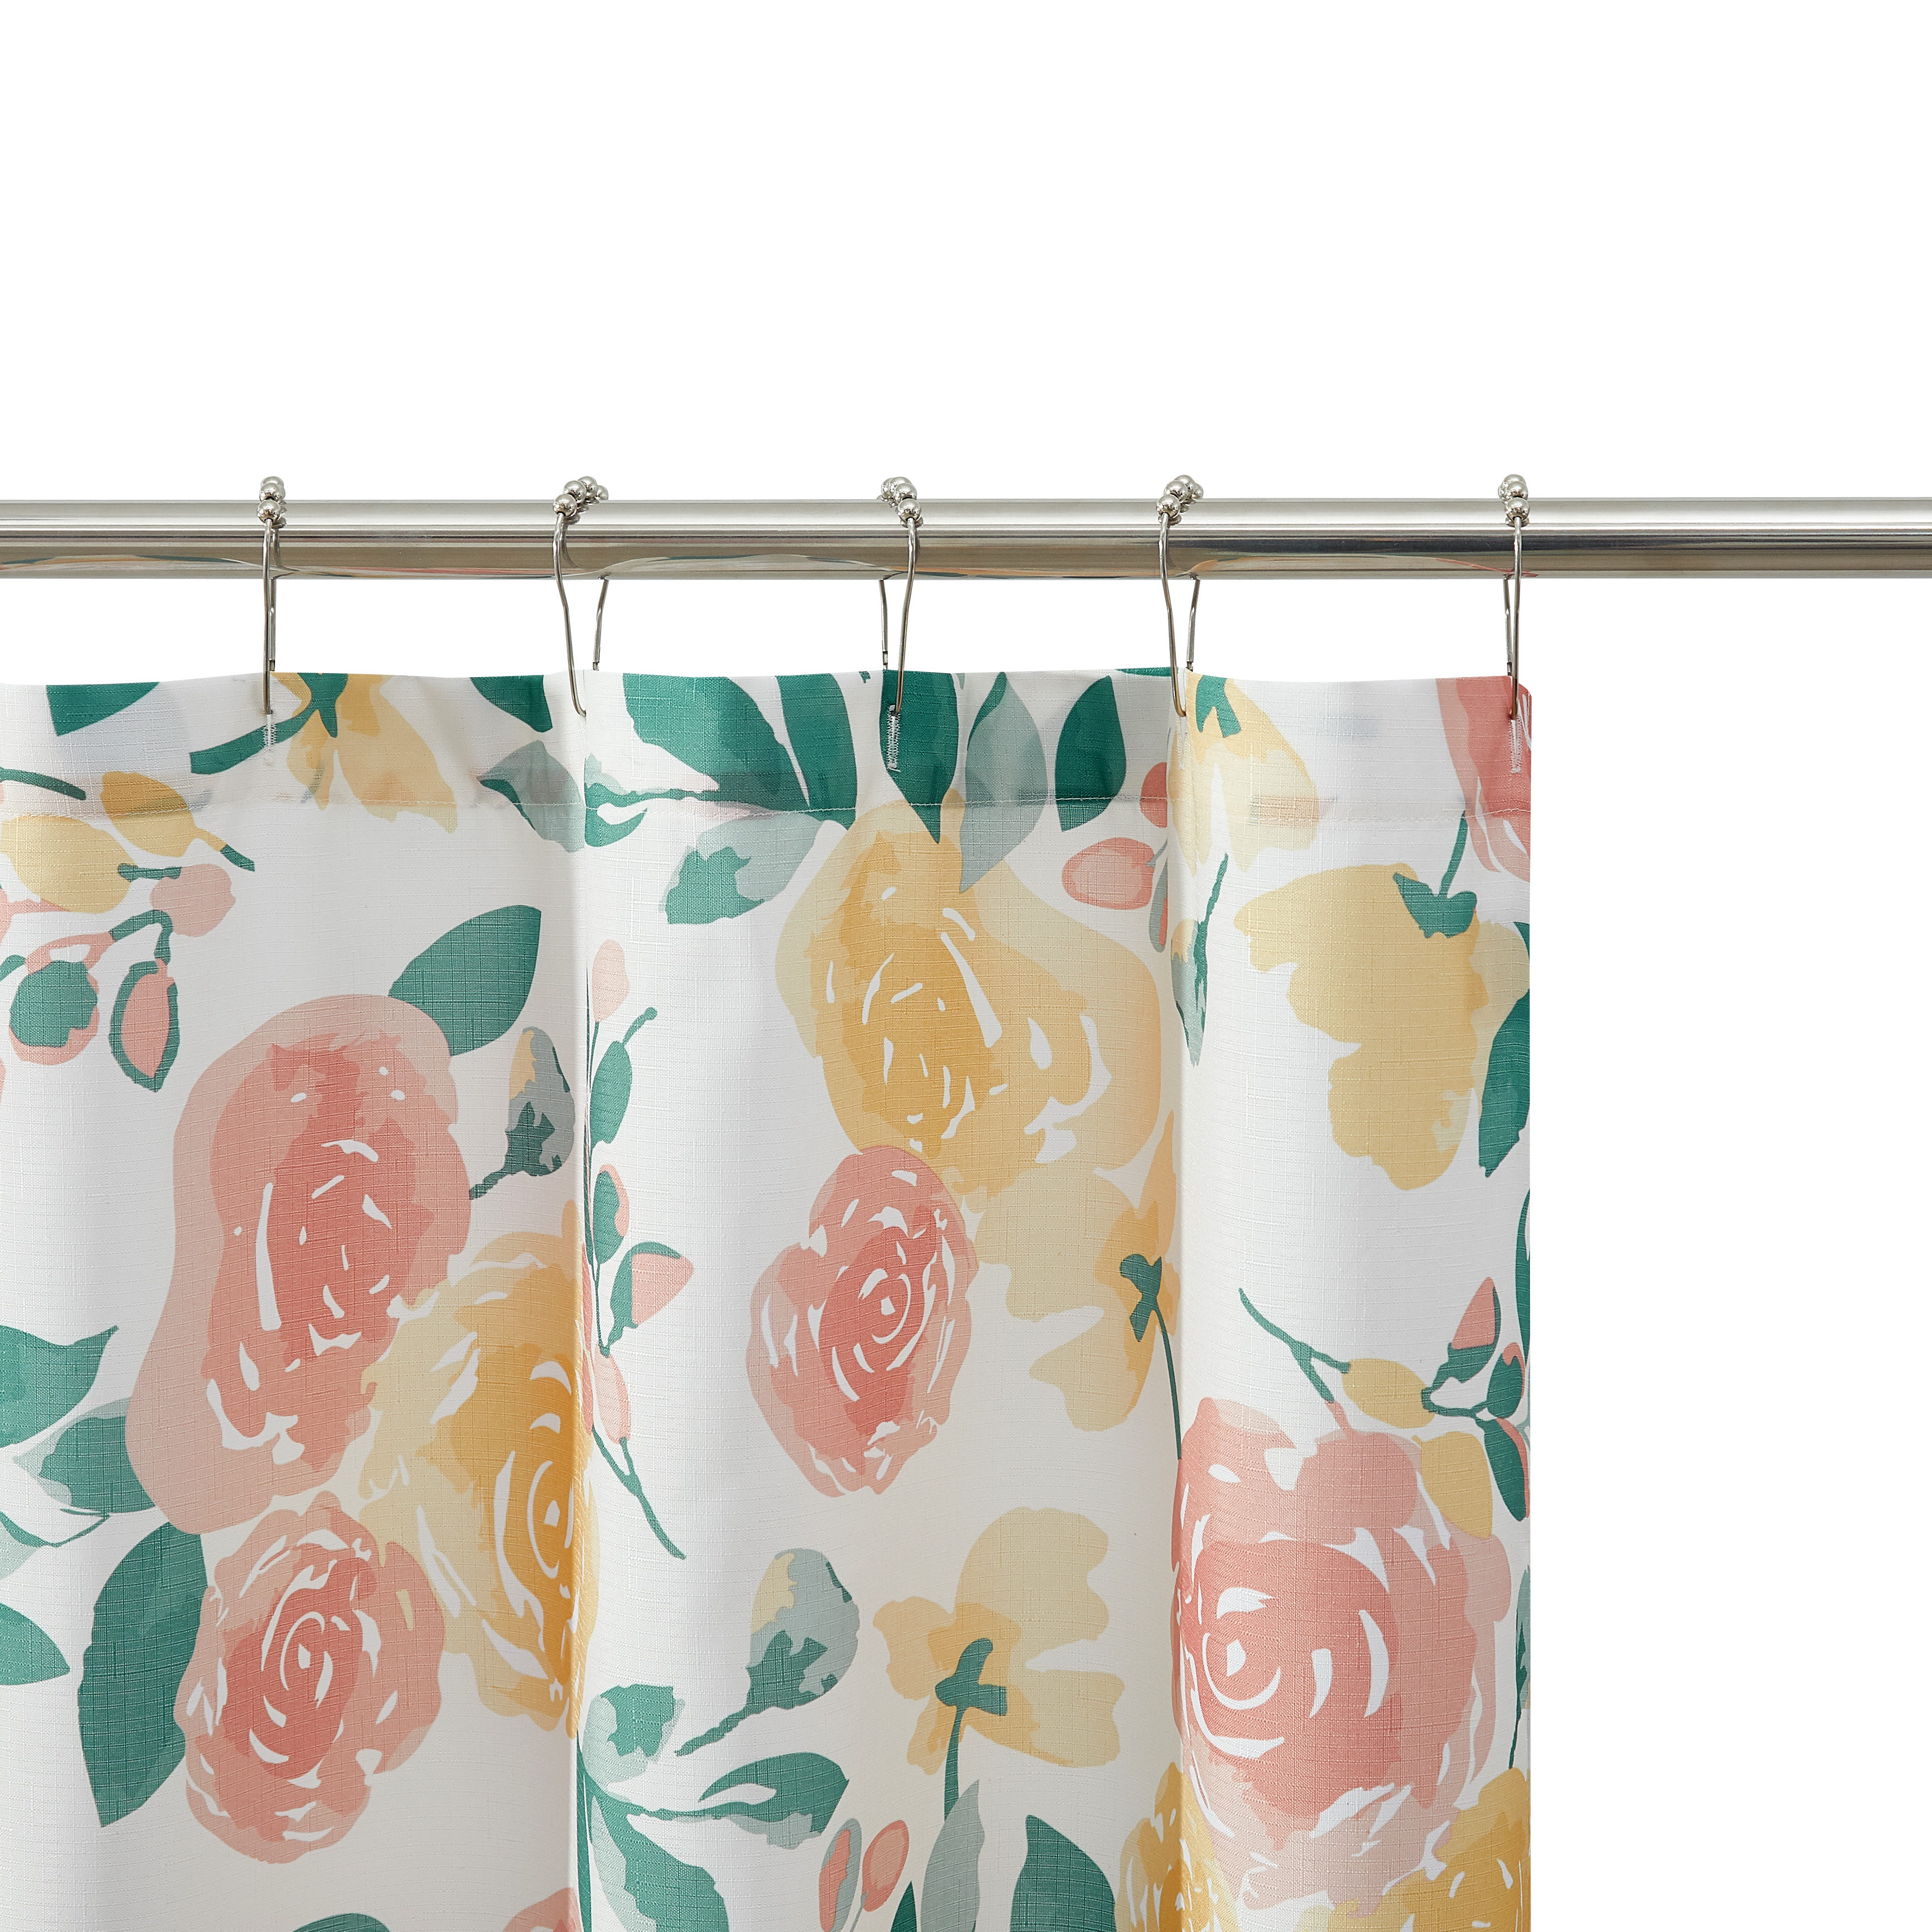 Mainstays Floral Flowers Polyester Shower Curtains, 72" x 72", Pink - image 5 of 5